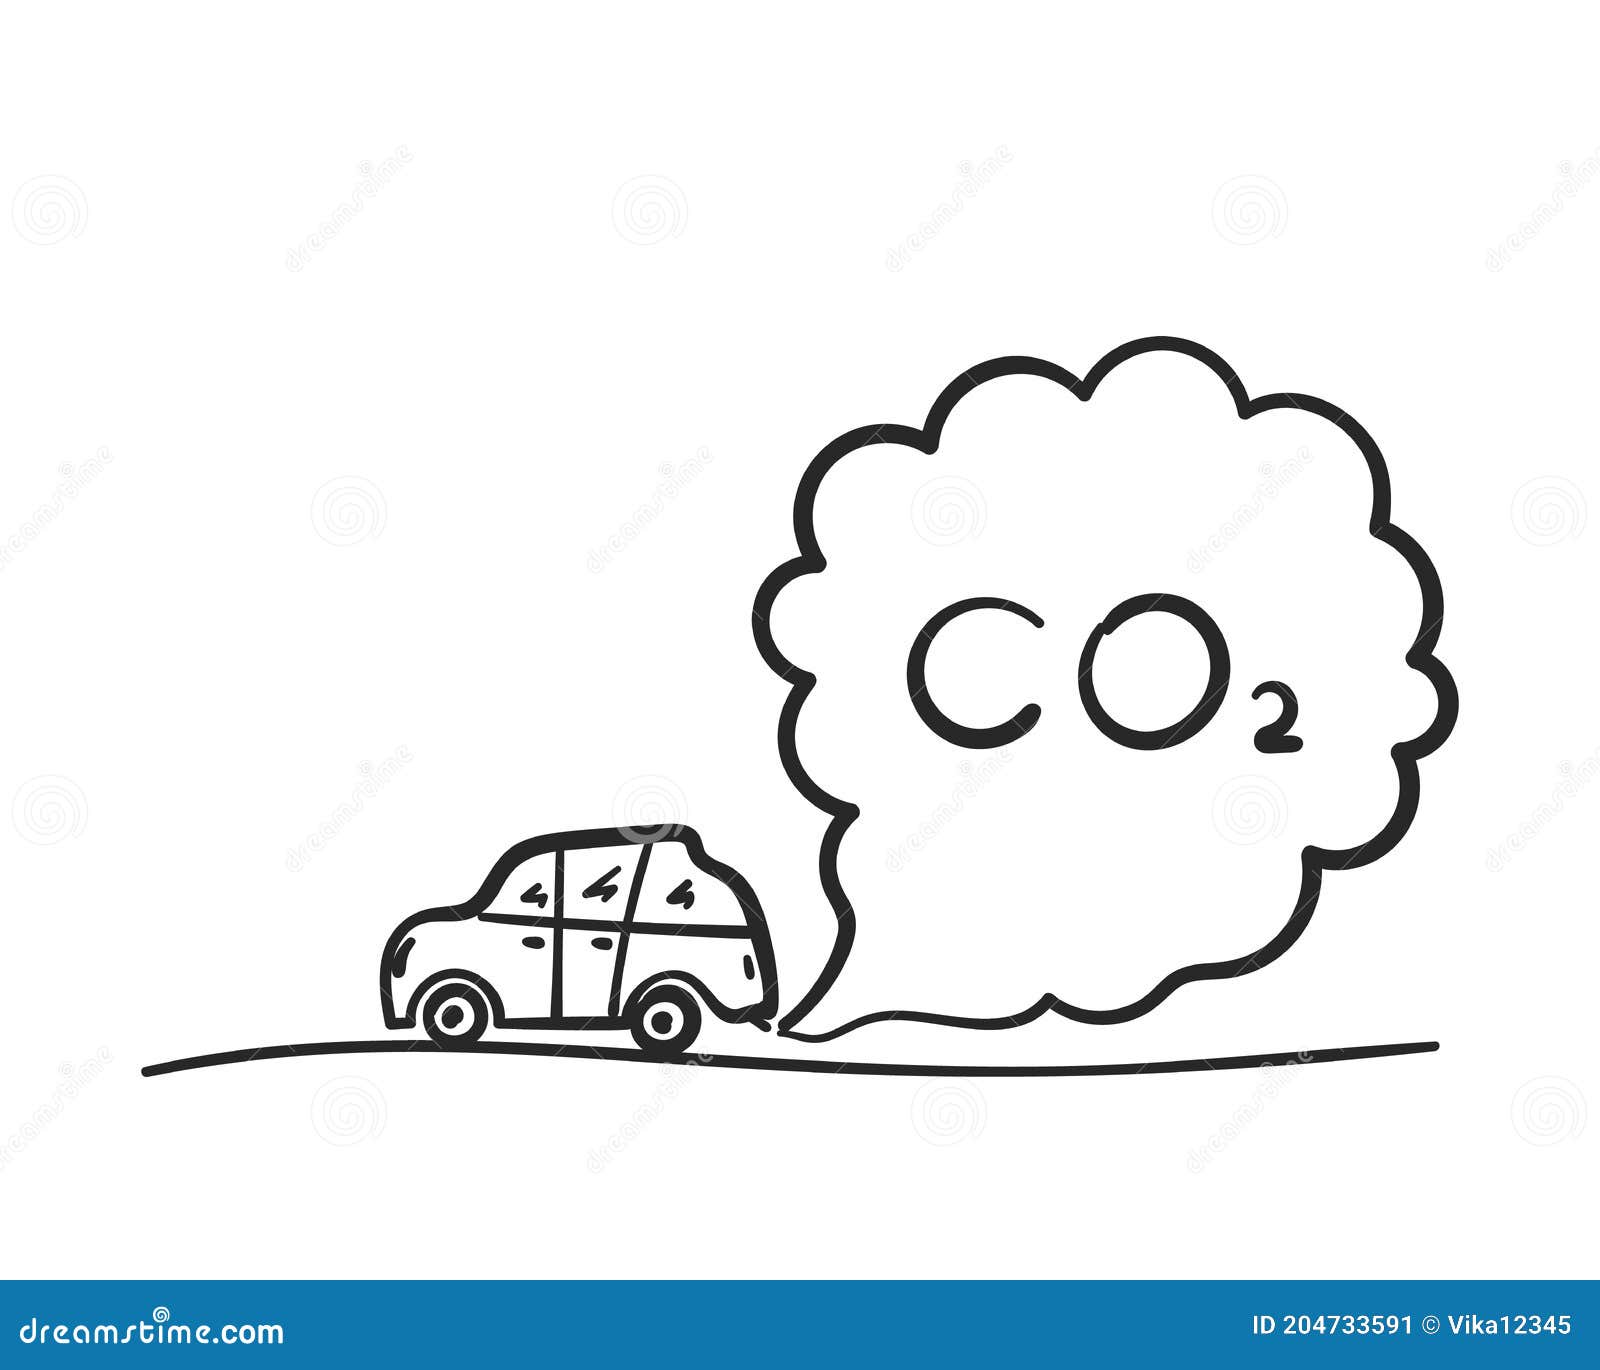 Cartoon Car Blowing Exhaust Fumes, Doodle CO2 Smoke Cloud Coming from  Automobile into Air, Environmental Concept Stock Vector - Illustration of  doodle, ecology: 204733591